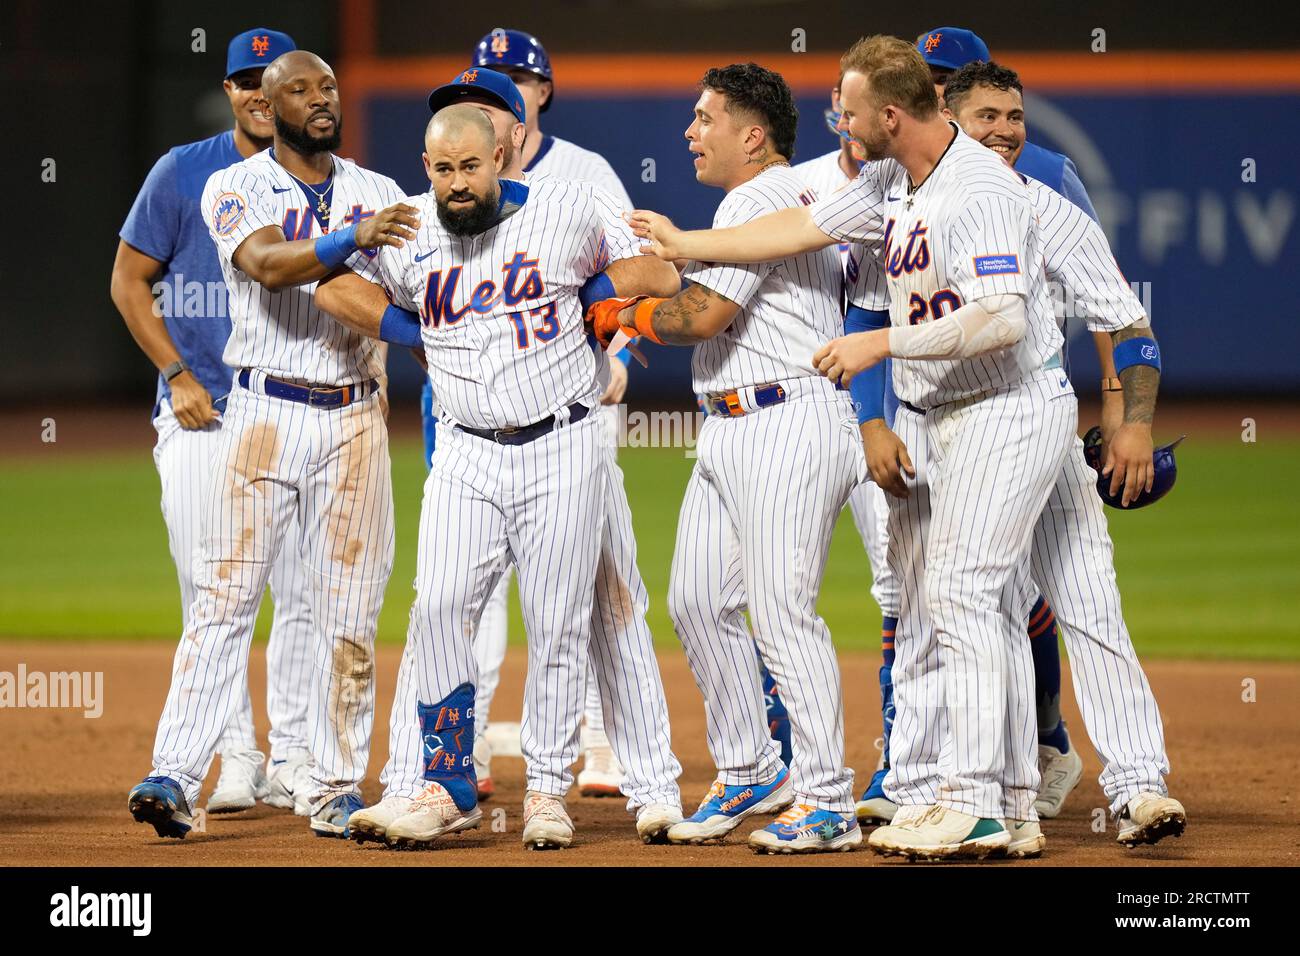 Teammates celebrate with New York Mets' Luis Guillorme (13) after